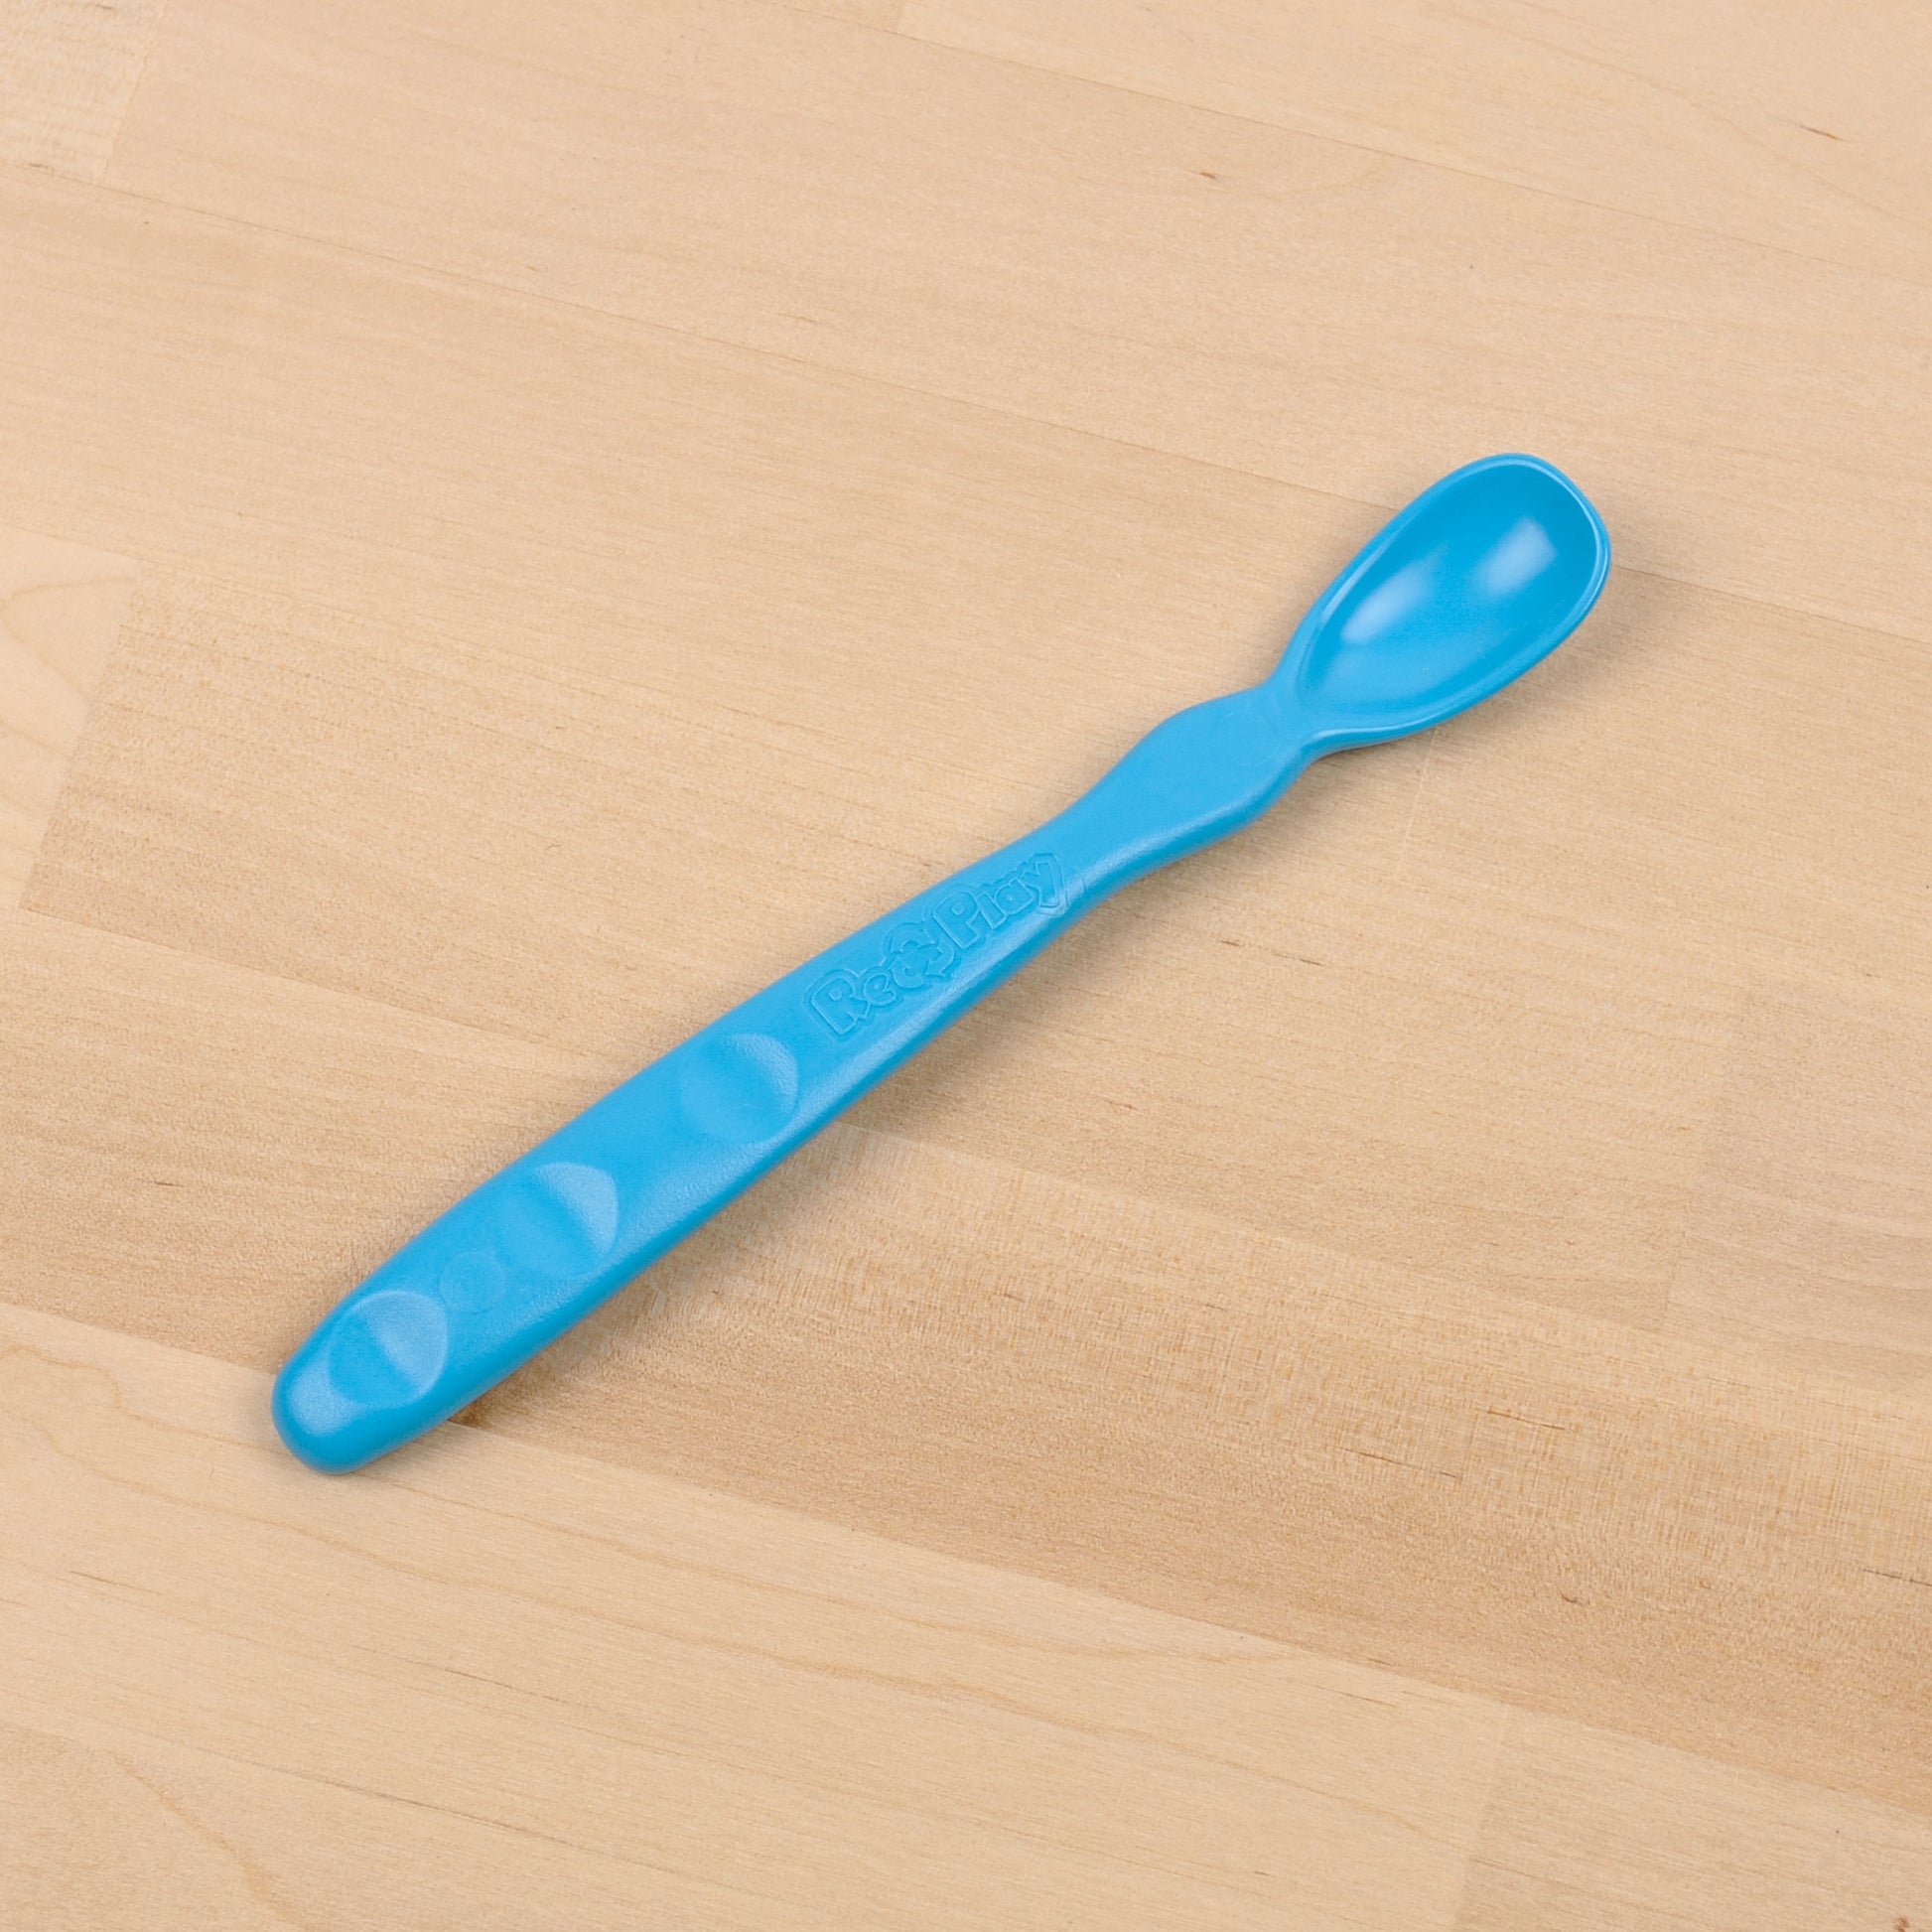 Re-Play Infant Spoon in Sky Blue from Bear & Moo